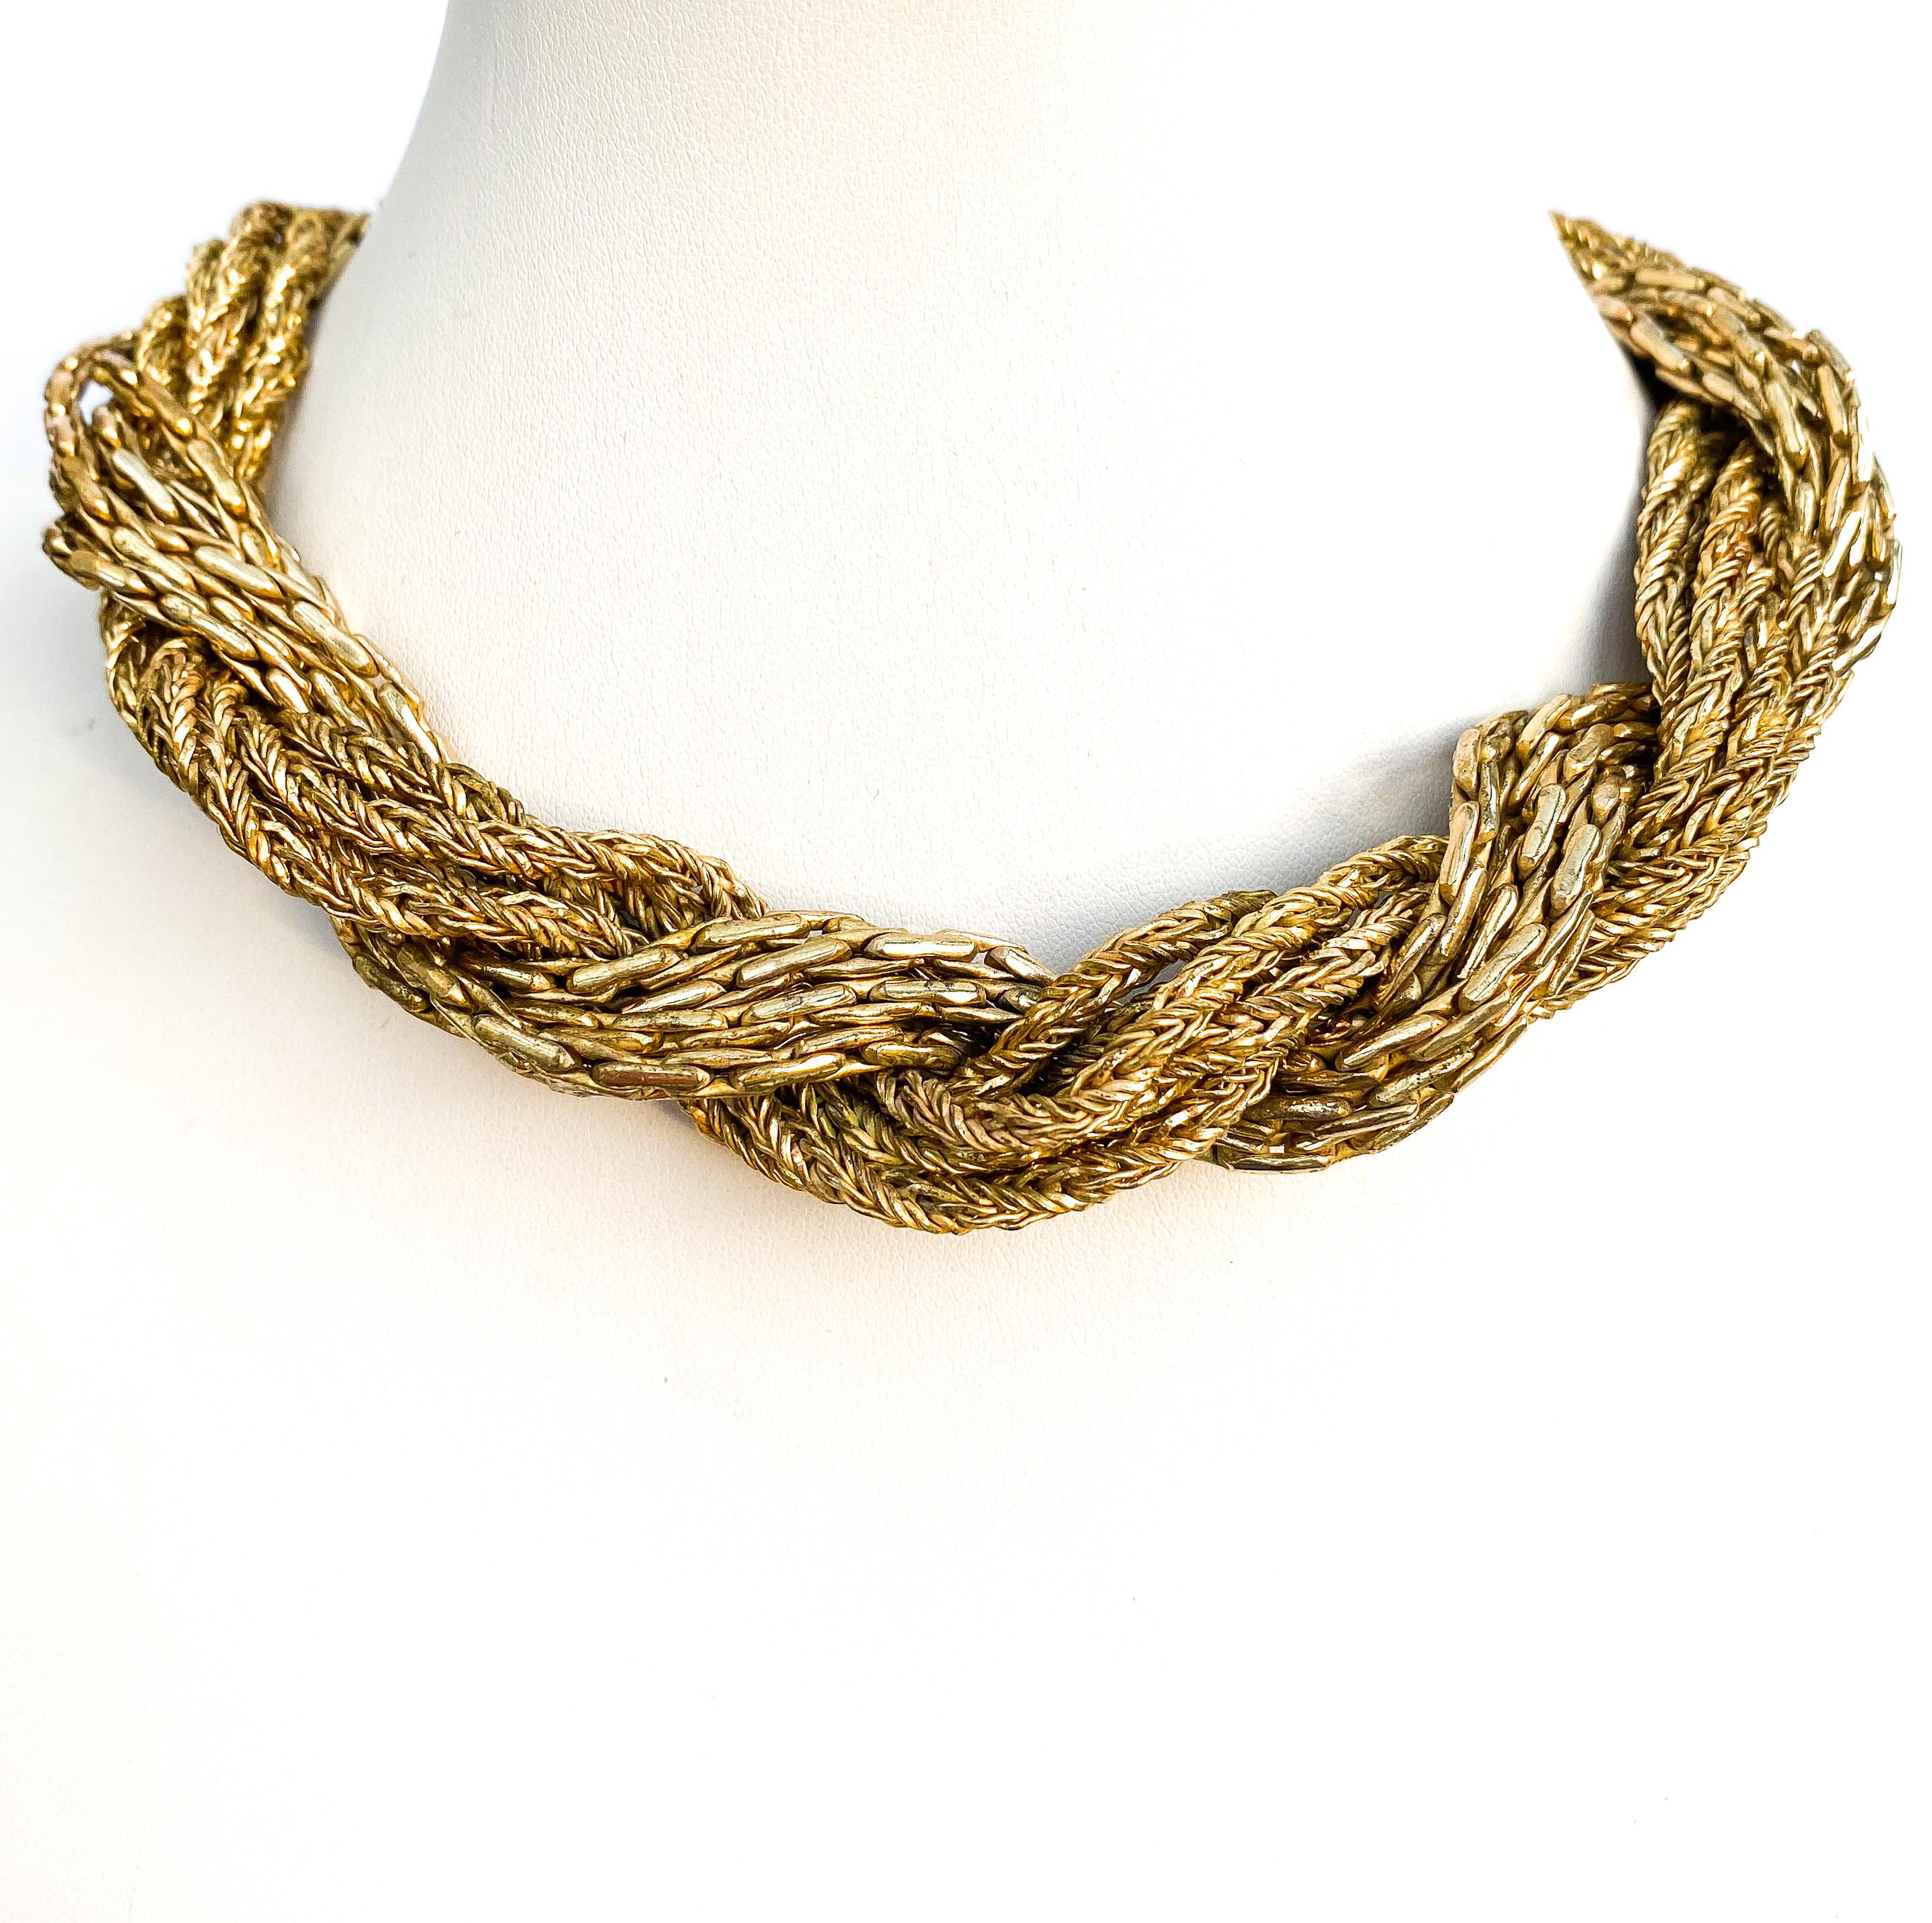 A striking and elegant choker necklace, beautifully made of two different chain elements that twist, one with the other, of outstanding quality. Very classic in its design, and very classic Dior of this period, this necklace would work perfectly in